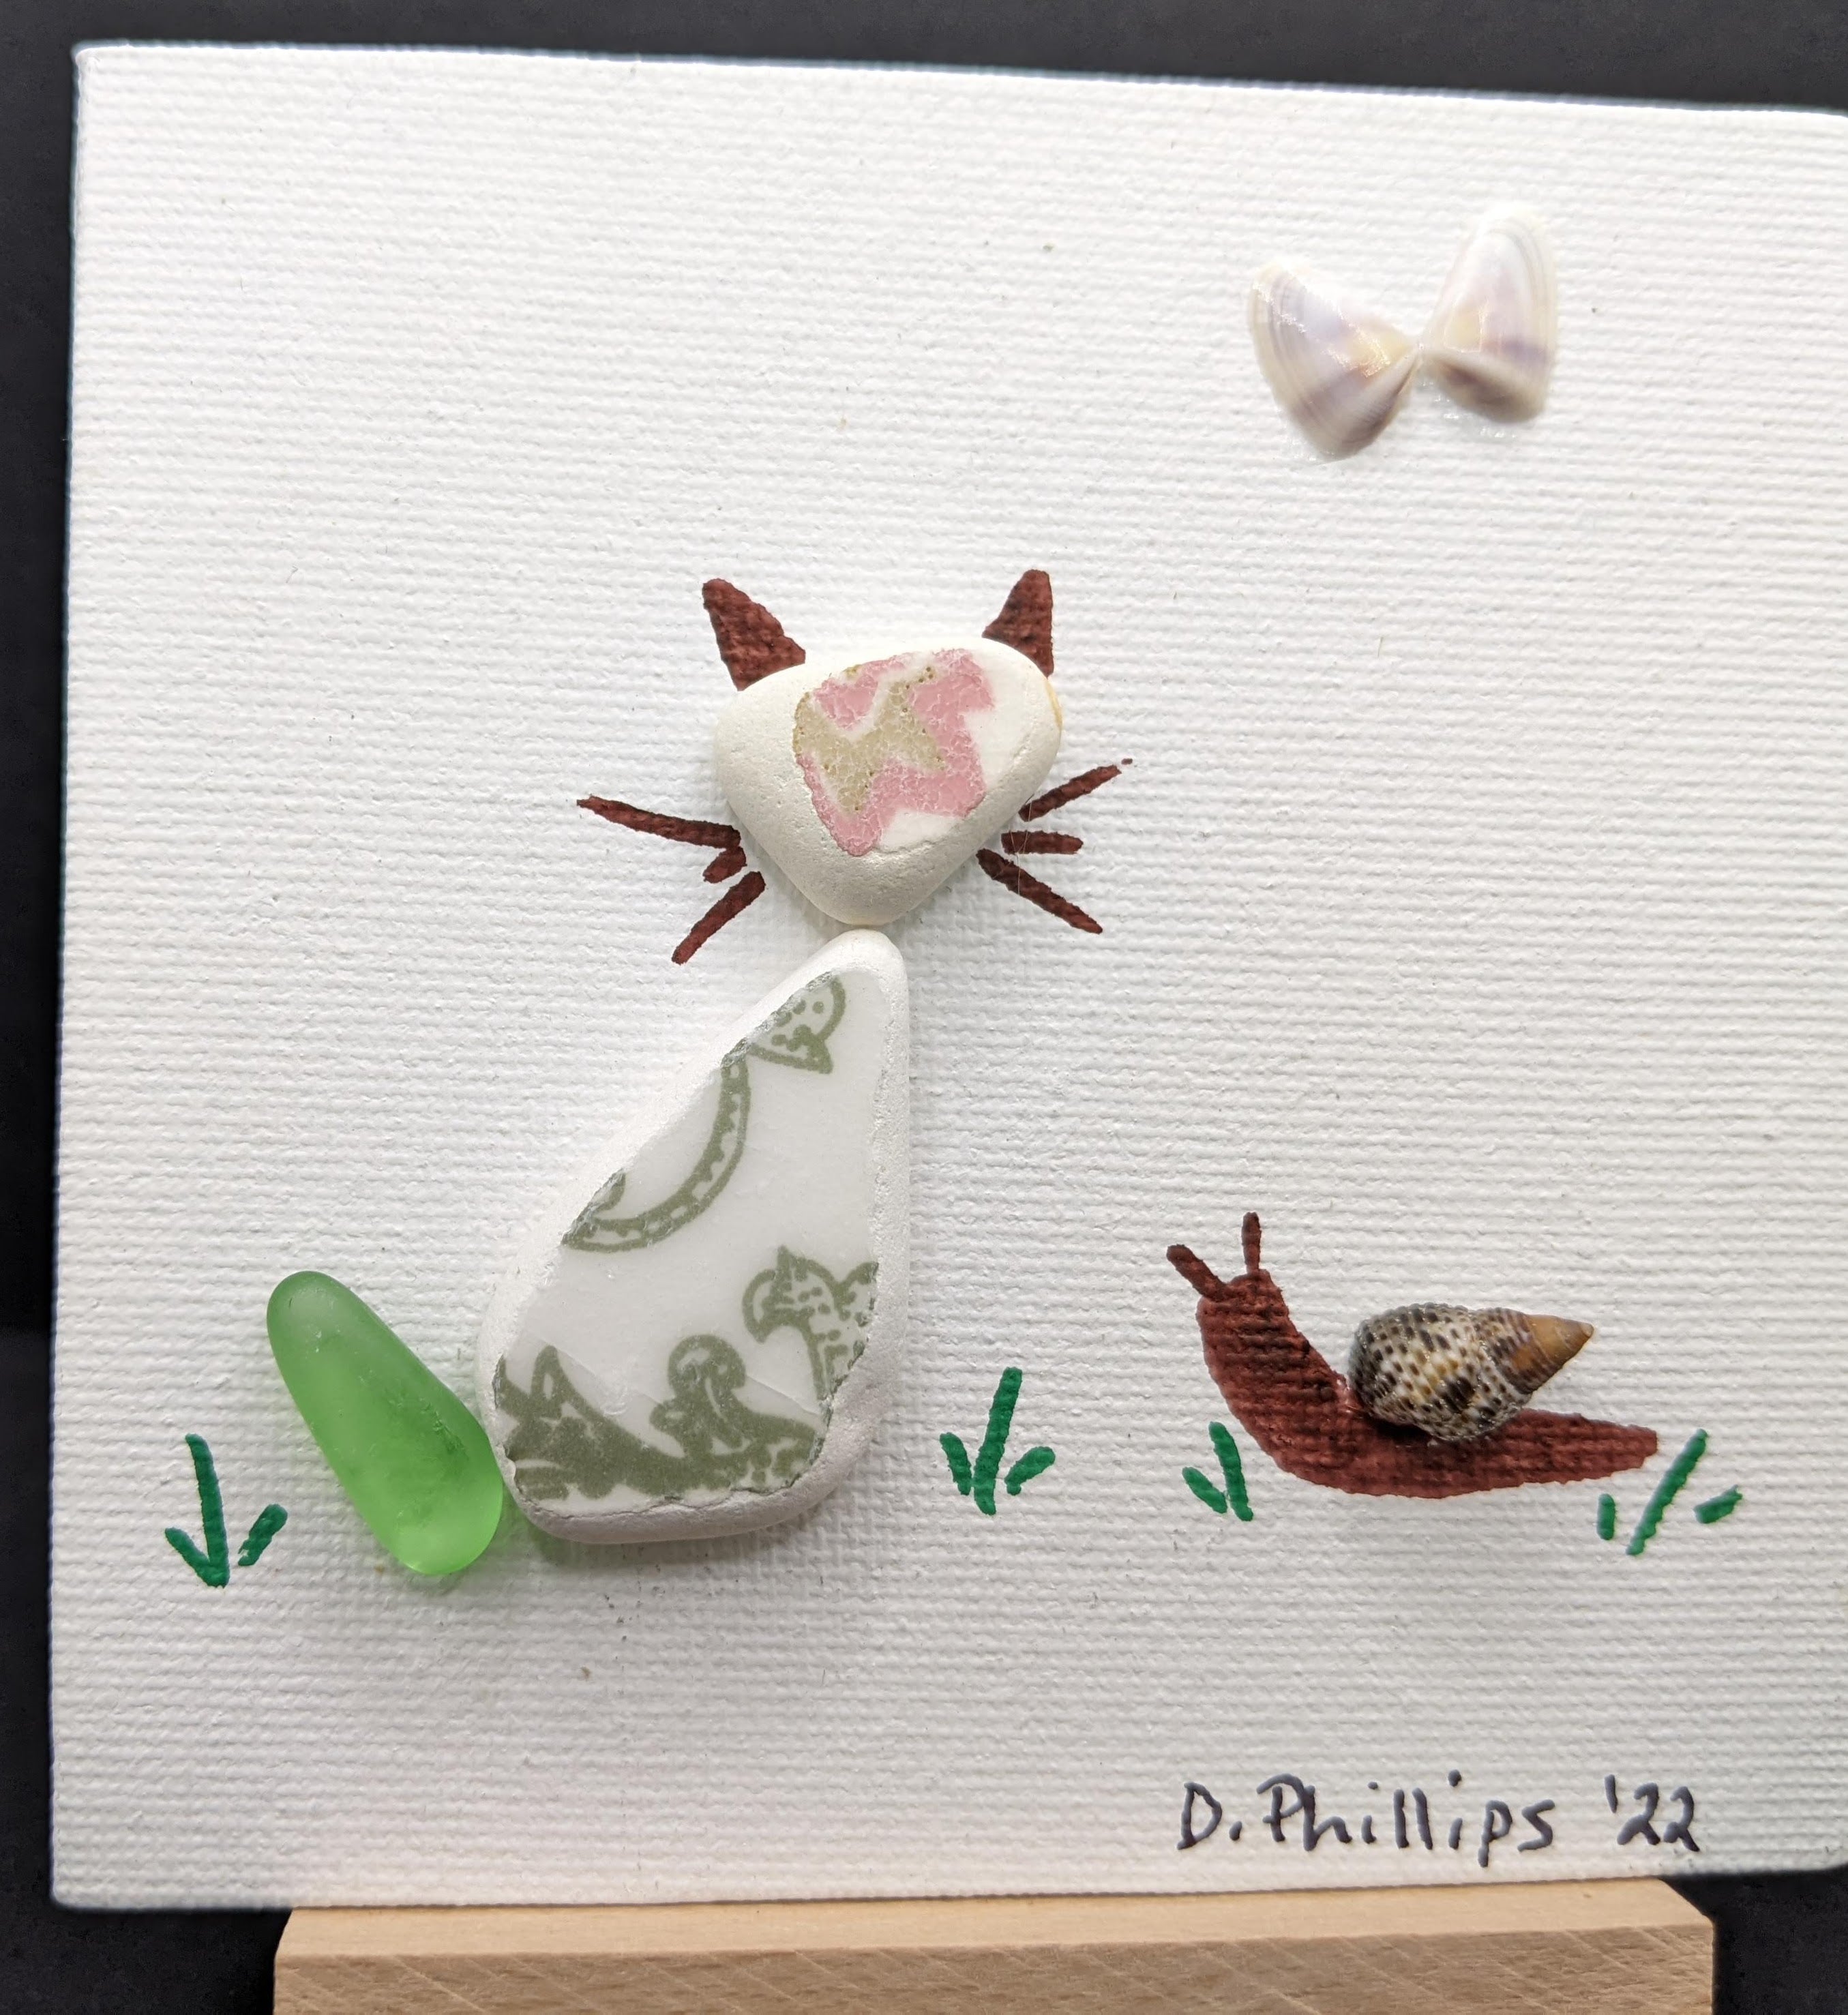 Cat, butterfly, and snail